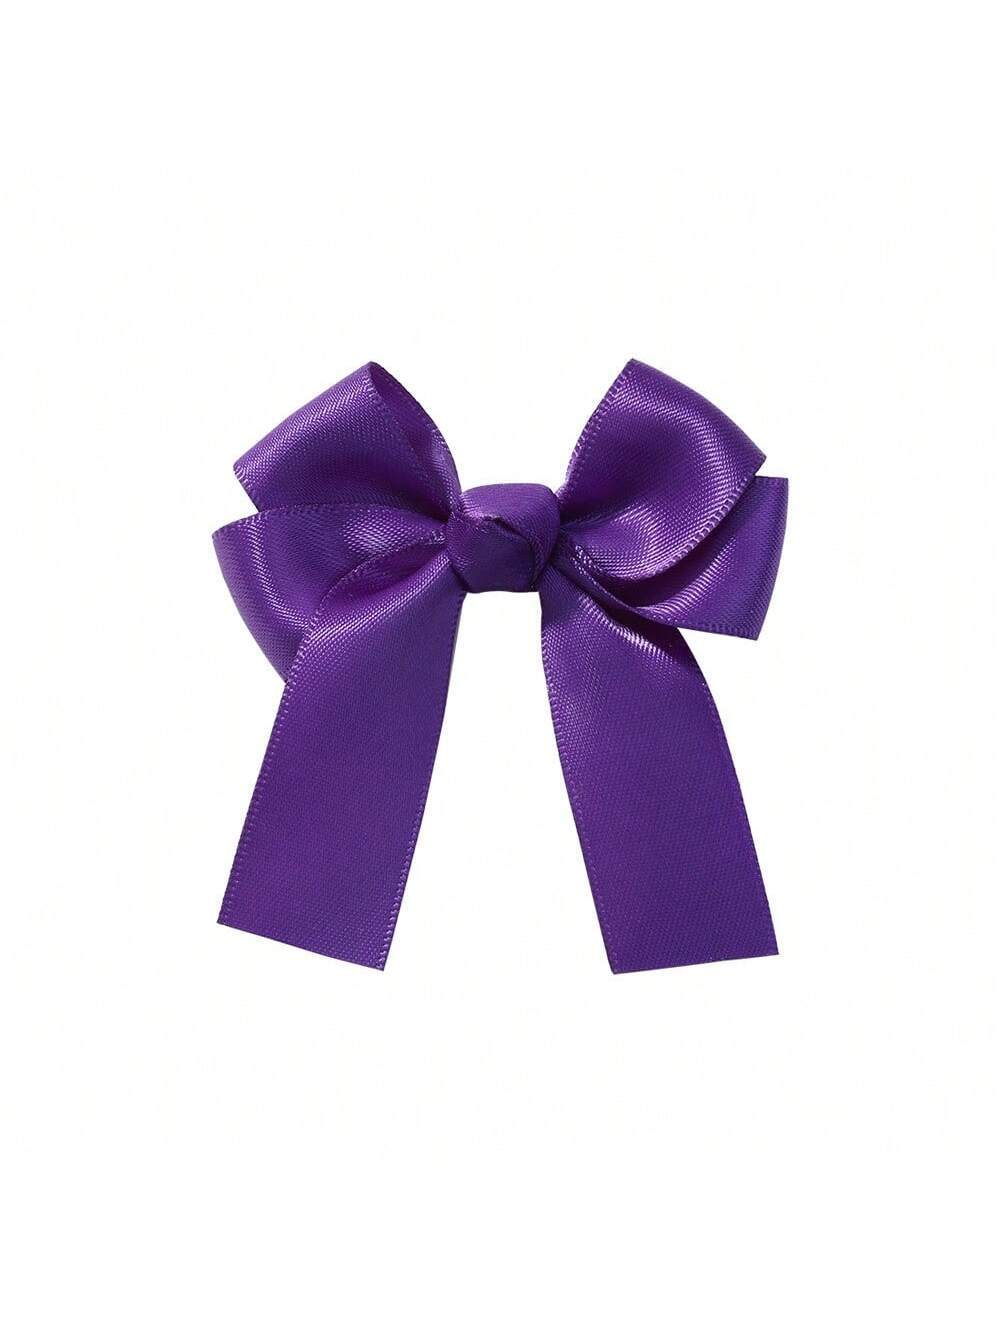 1pc Candy-Colored Bowknot Ribbon Hair Clip